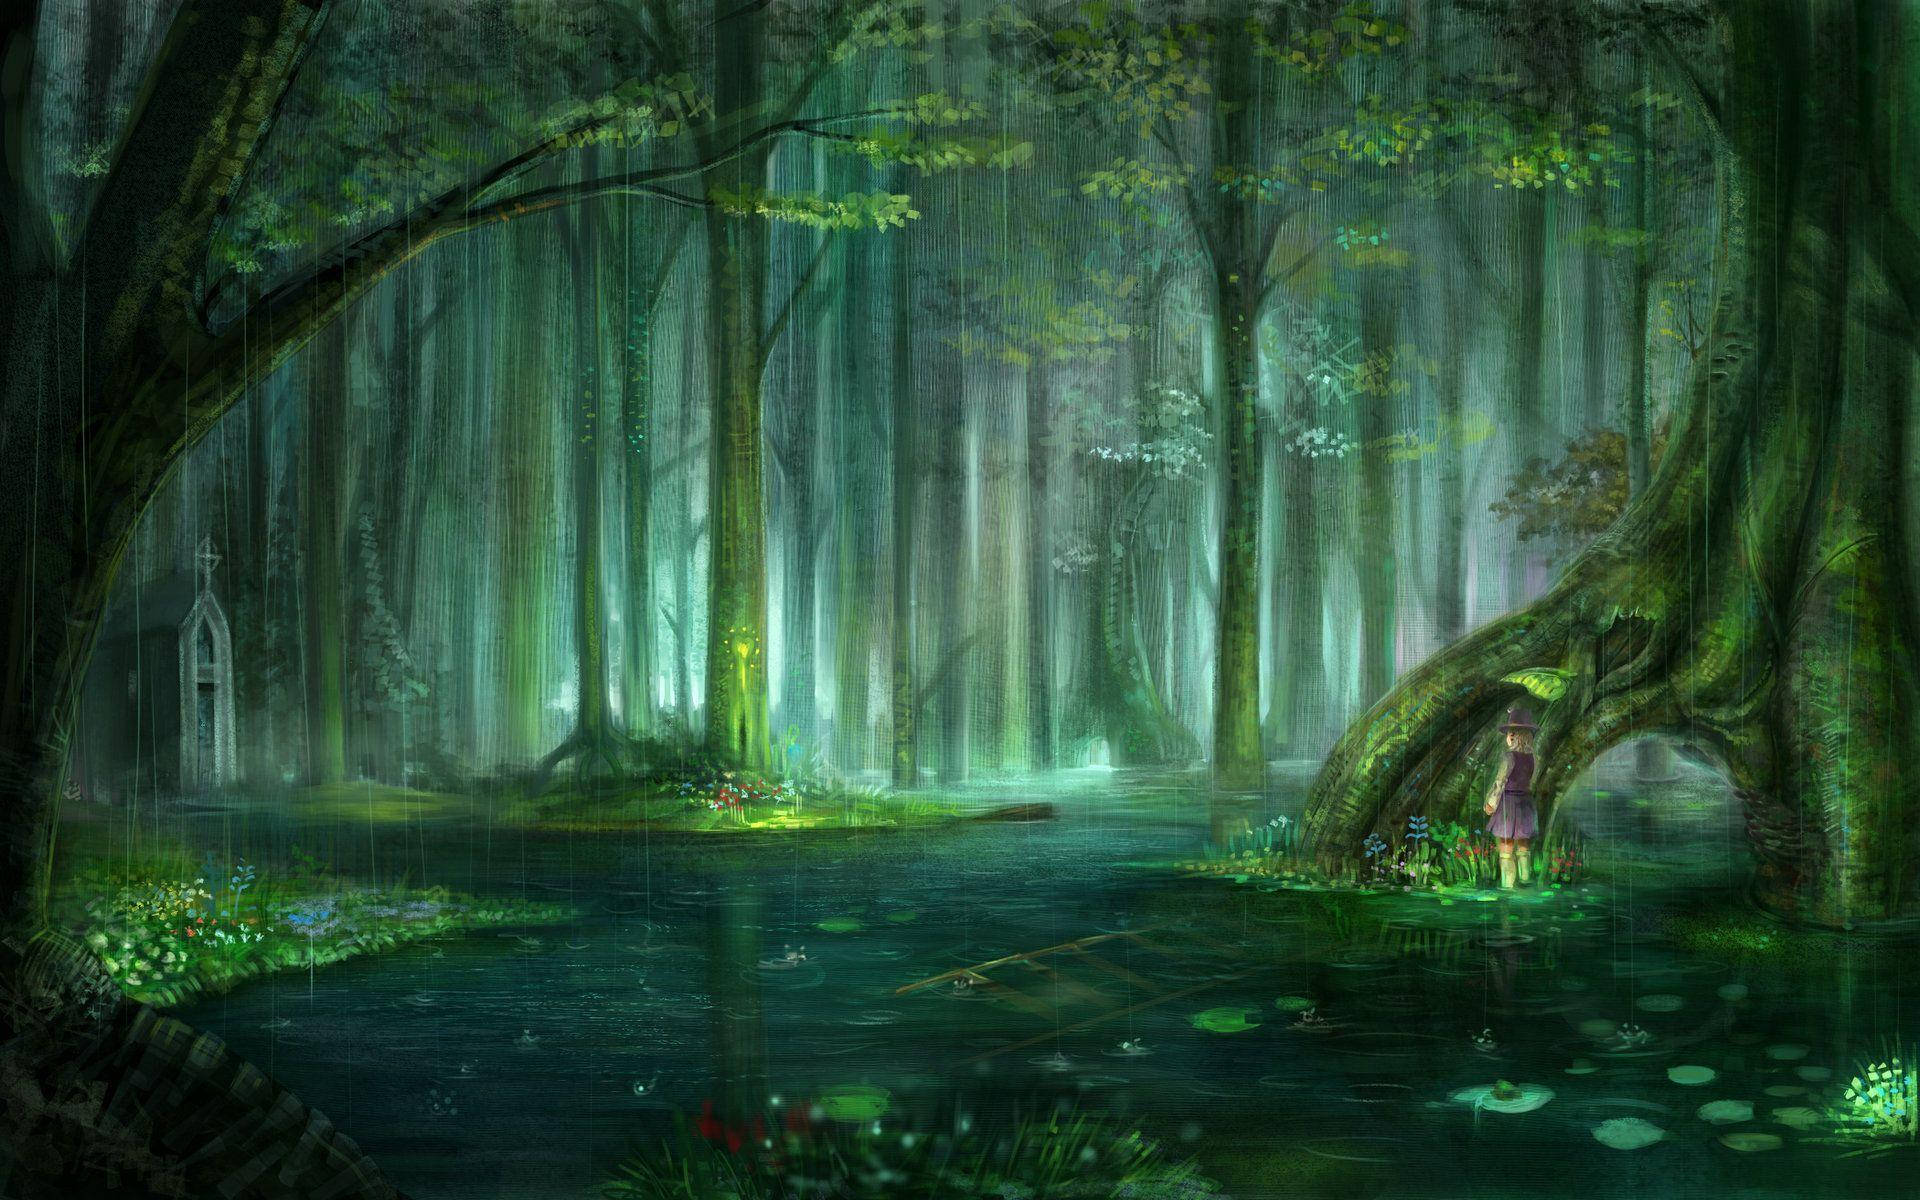 Rainy Day In An Enchanted Forest Background